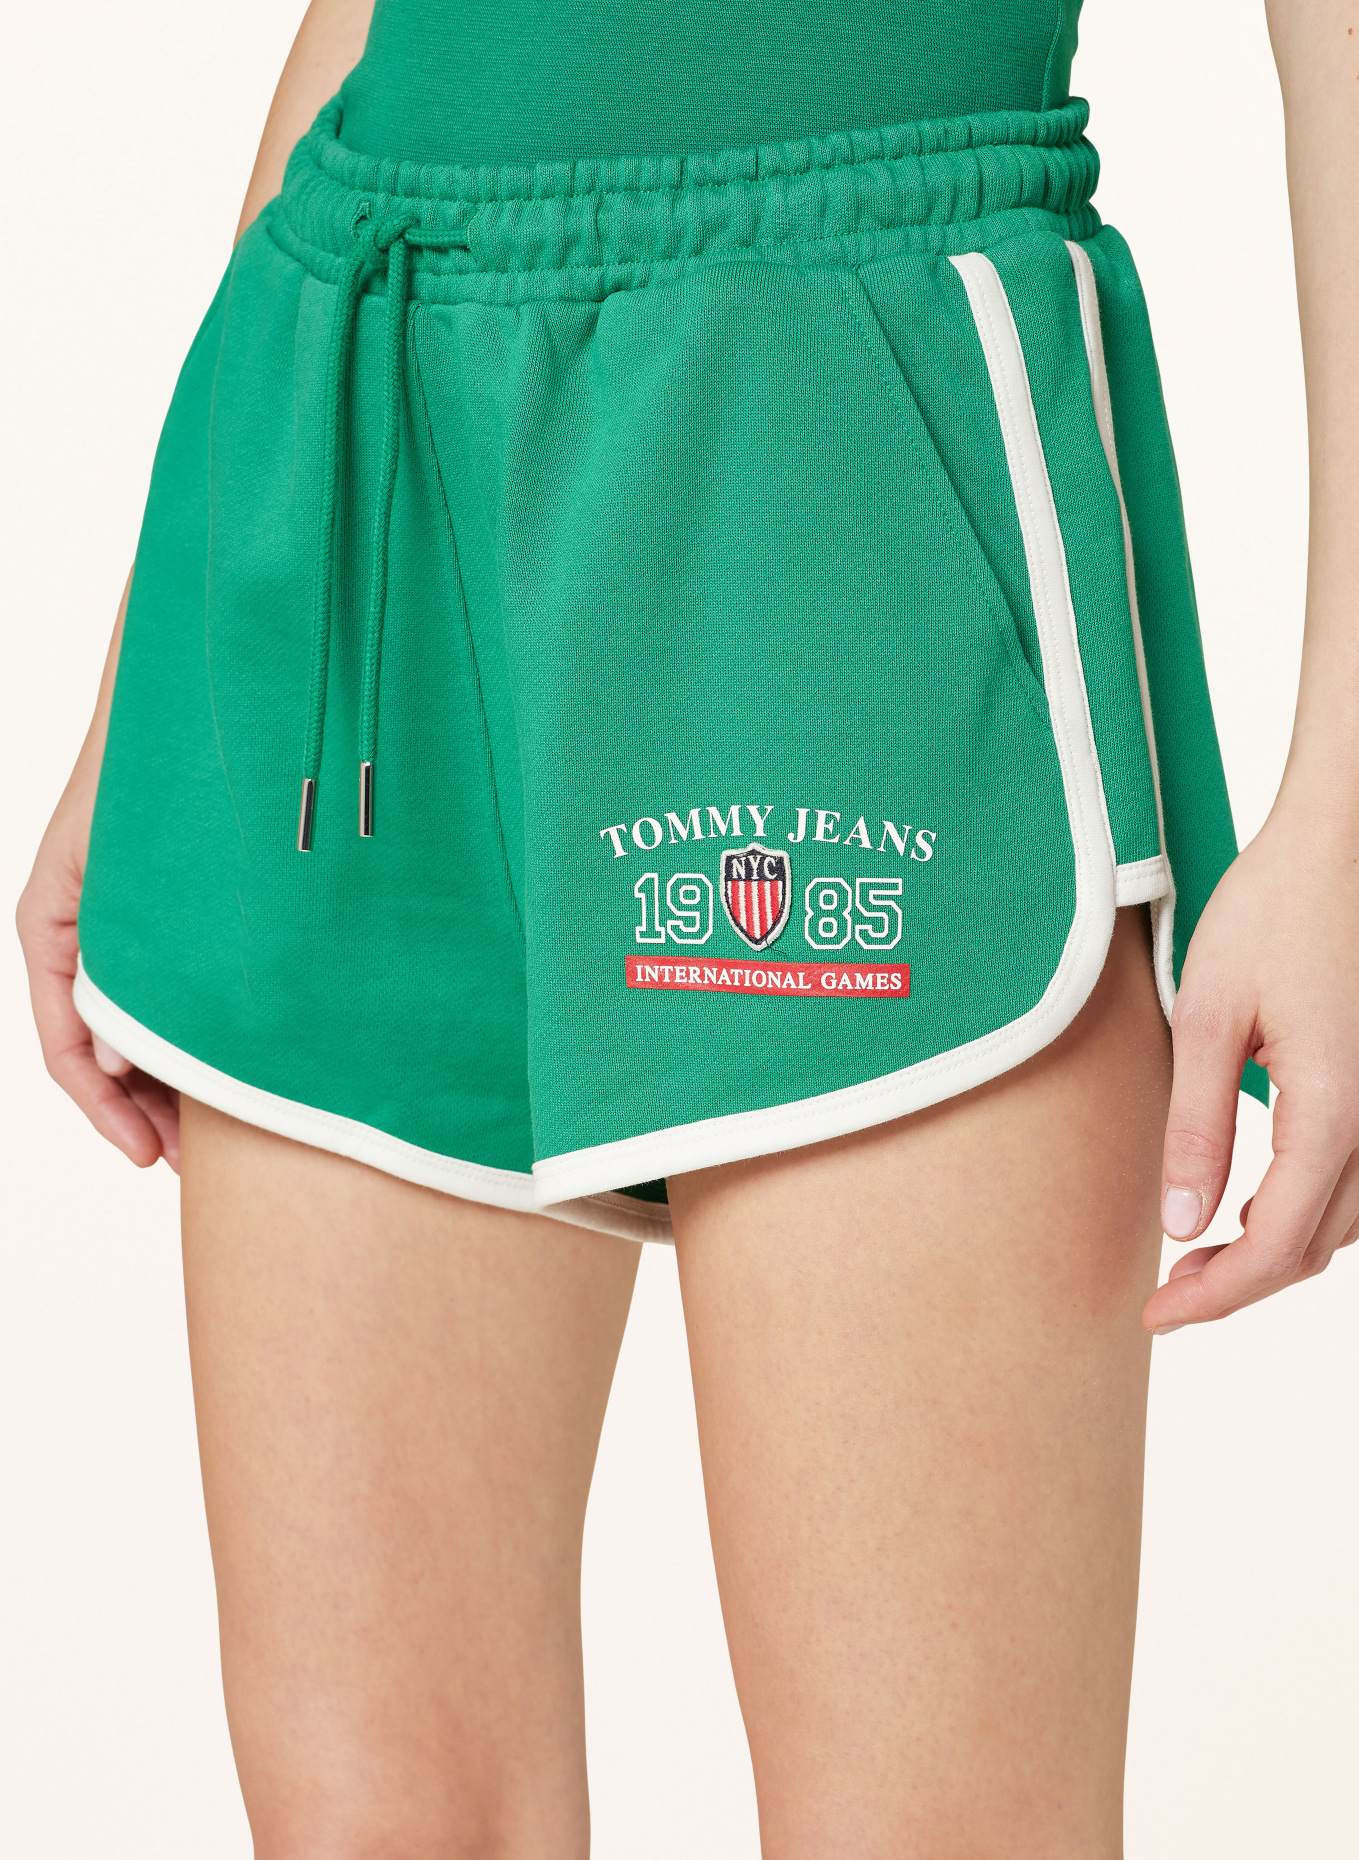 TOMMY JEANS Sweat shorts, Color: GREEN/ WHITE/ RED (Image 5)